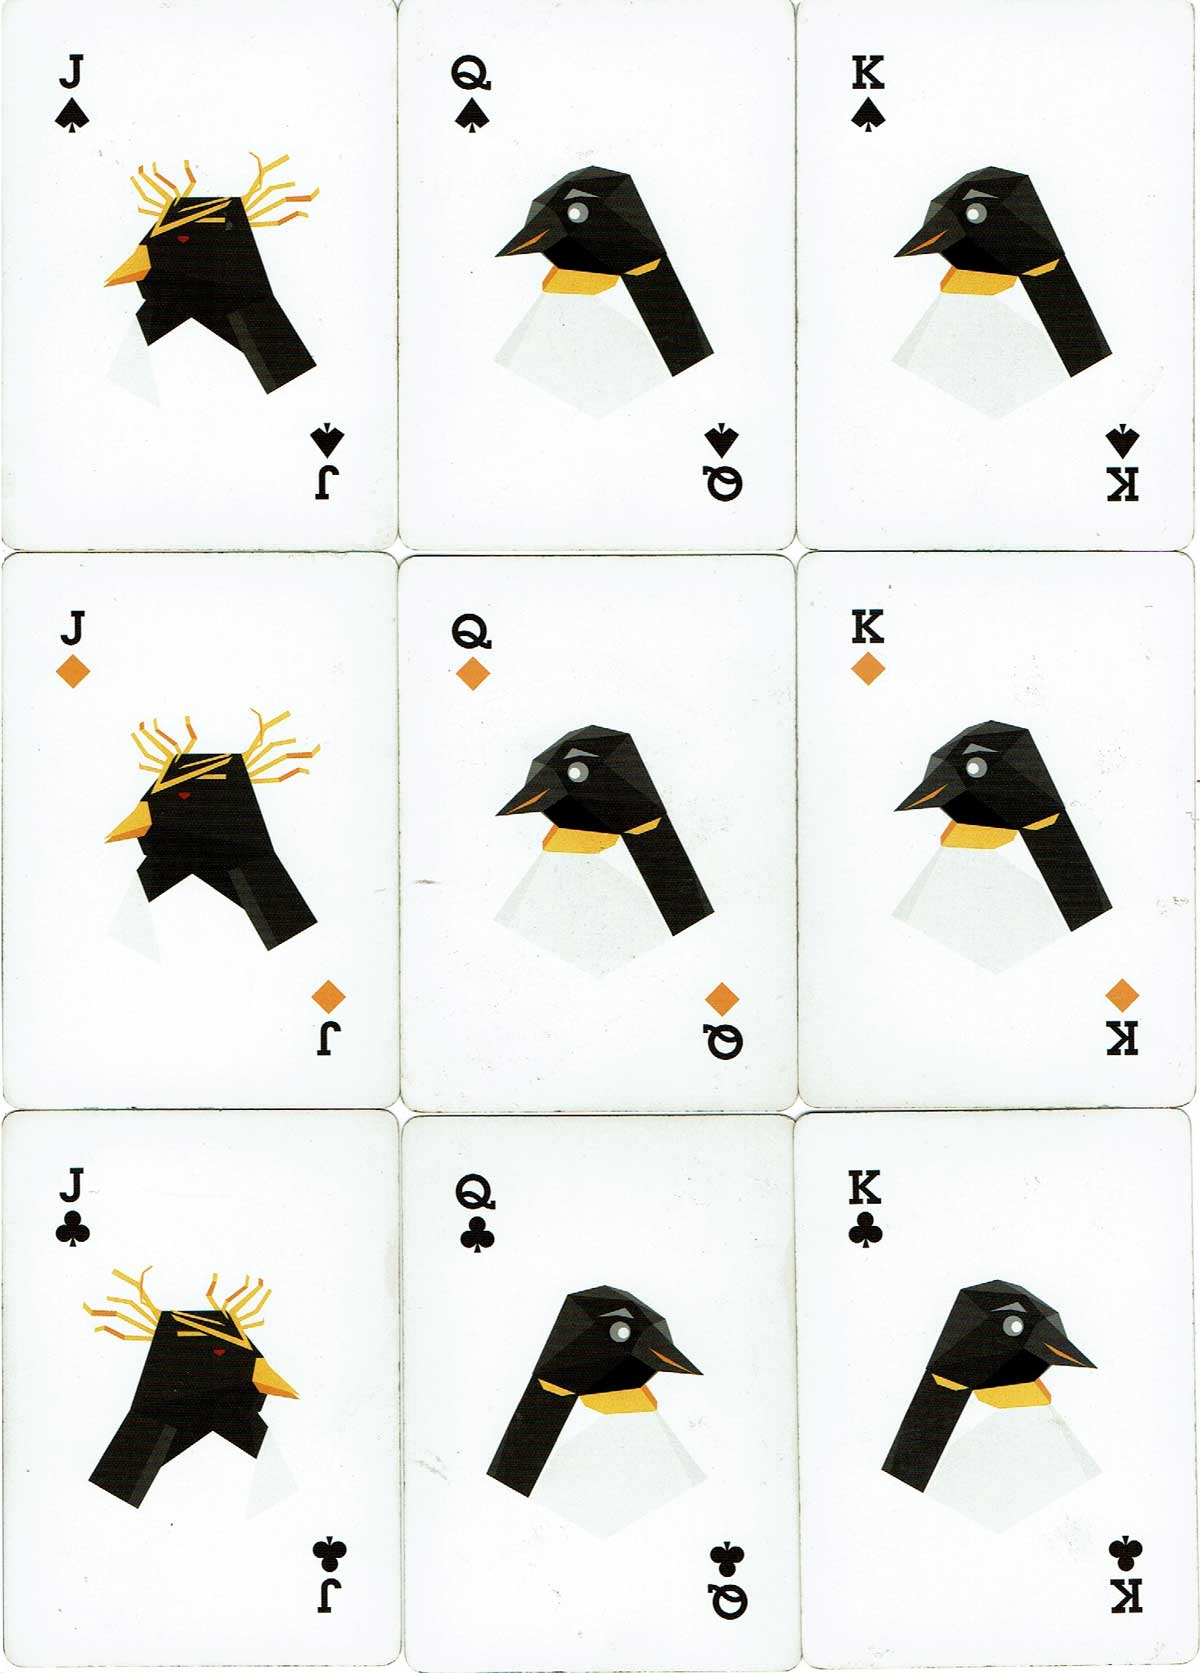 IBM Linux One playing cards, c.2018